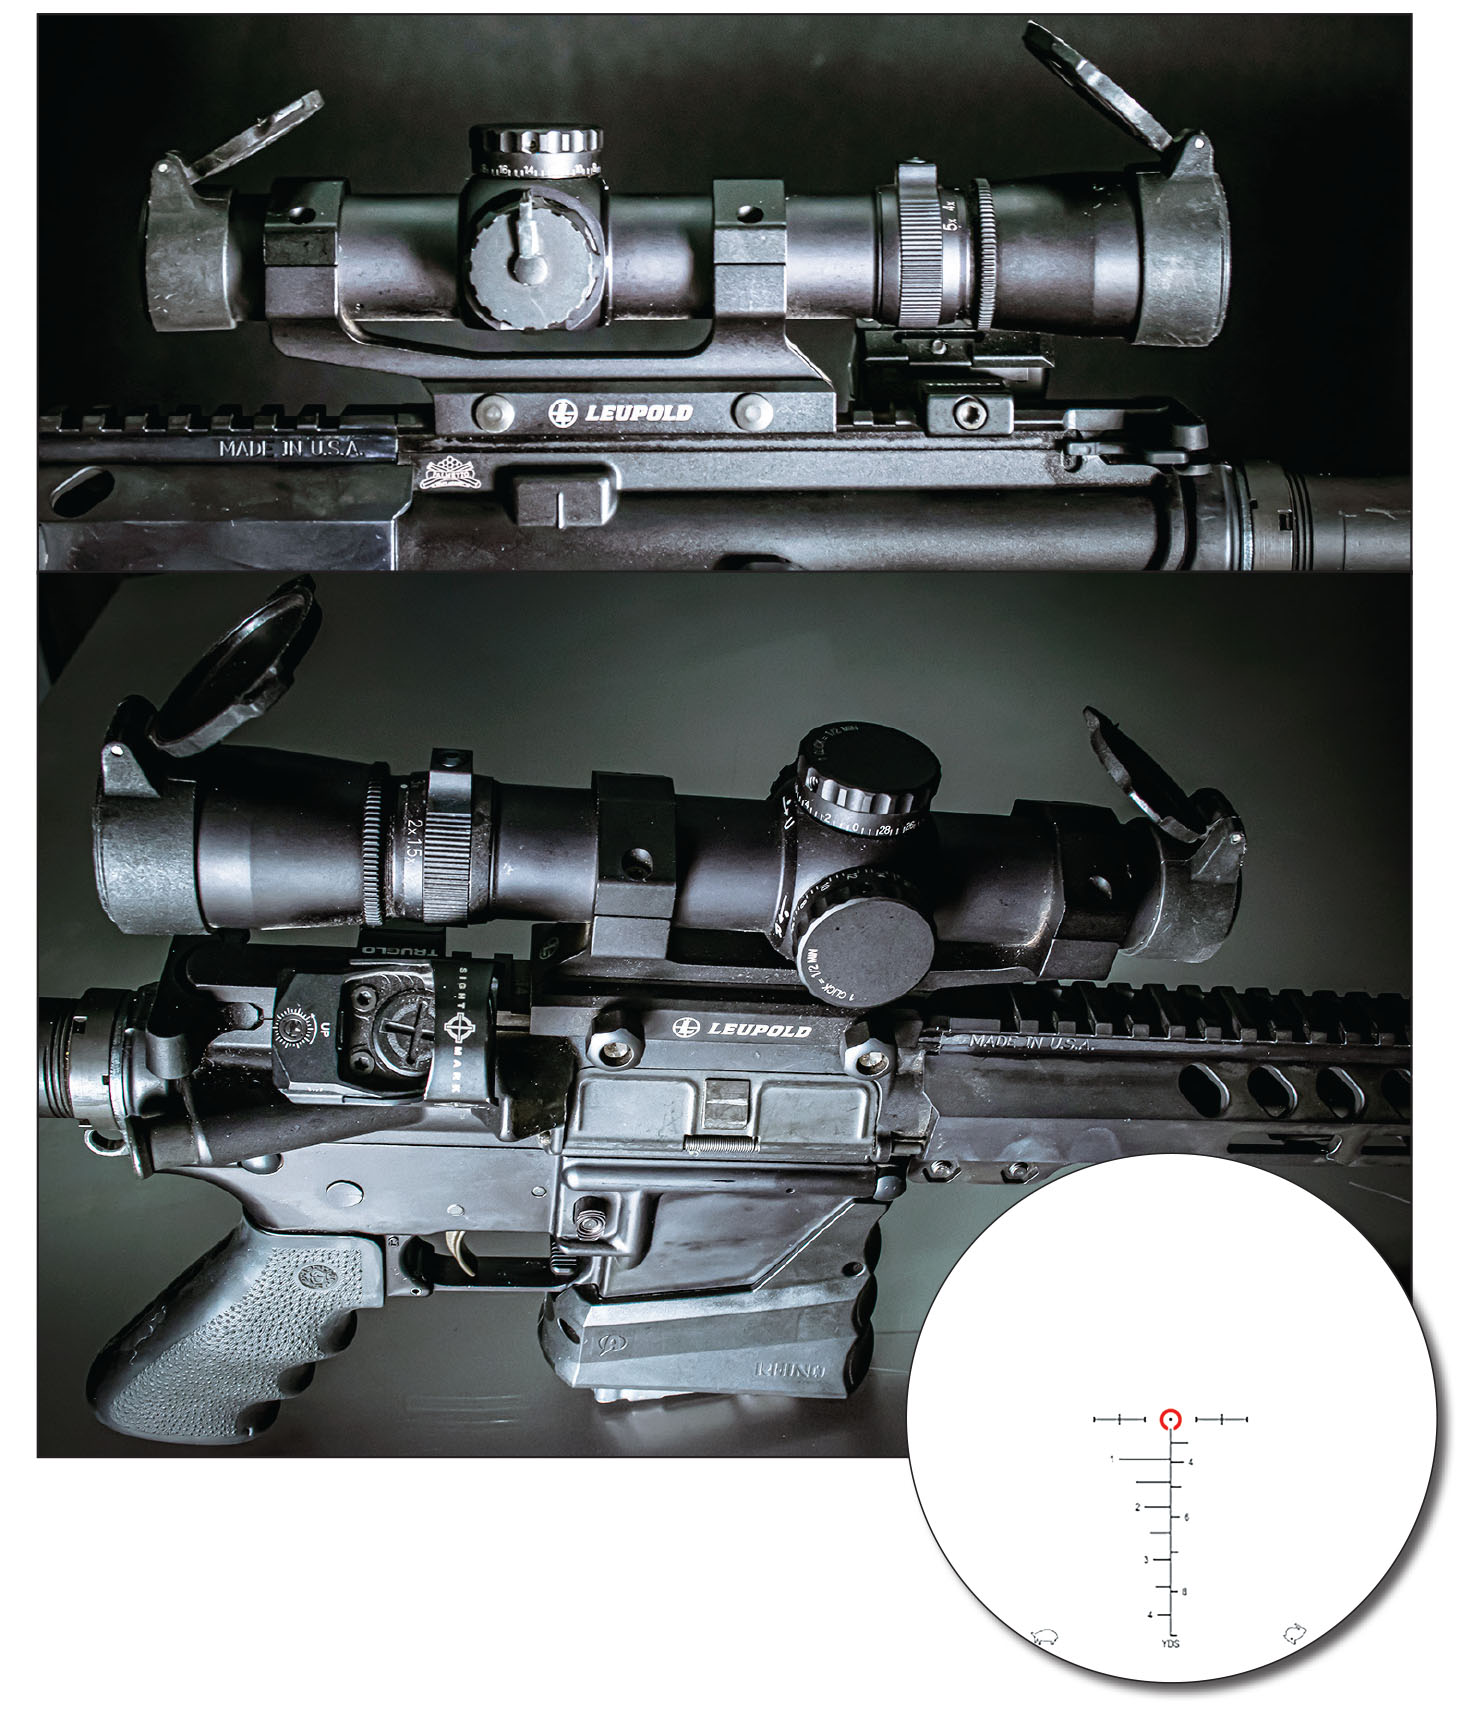 An excellent optic for the .300 Blackout is the Leupold Mark 4 MR/T 1.5-5x 20mm scope that features an illuminated reticle  specifically made for the .300 Blackout and offers holdover points for both subsonic and supersonic ammunition. Sadly, this option has been discontinued by the manufacturer at the time of this writing.